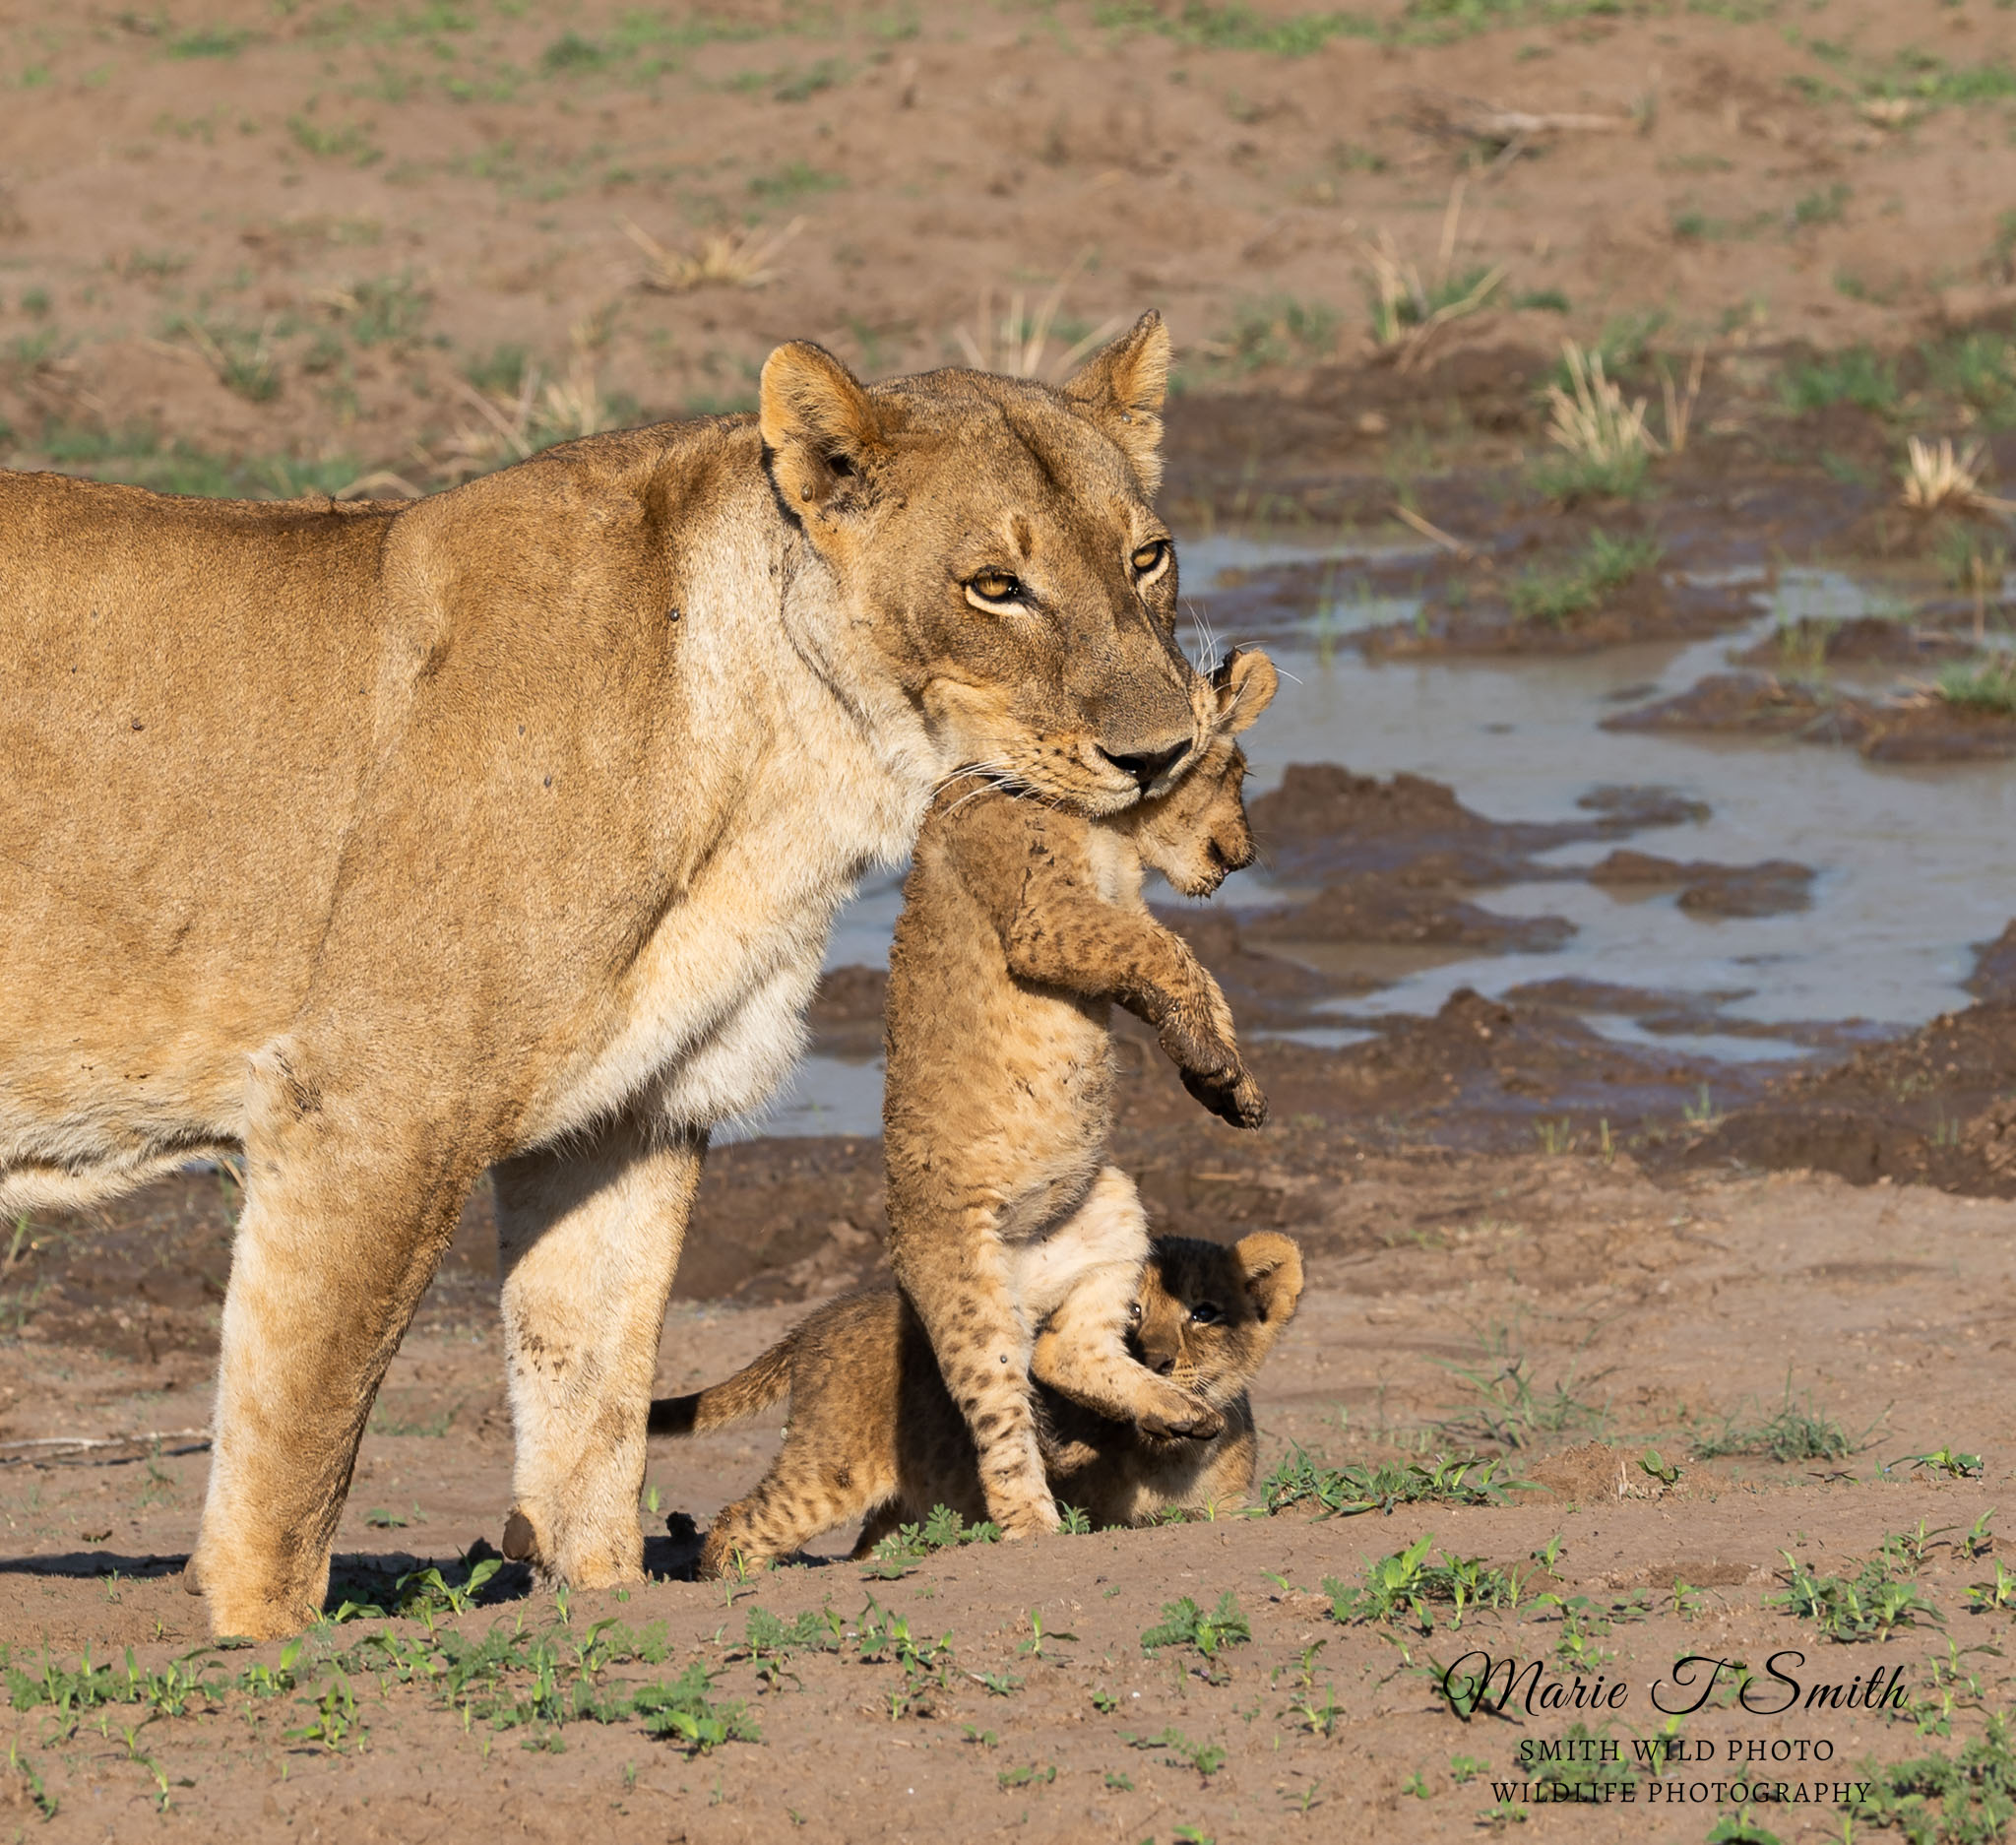 Lioness carrying her cub